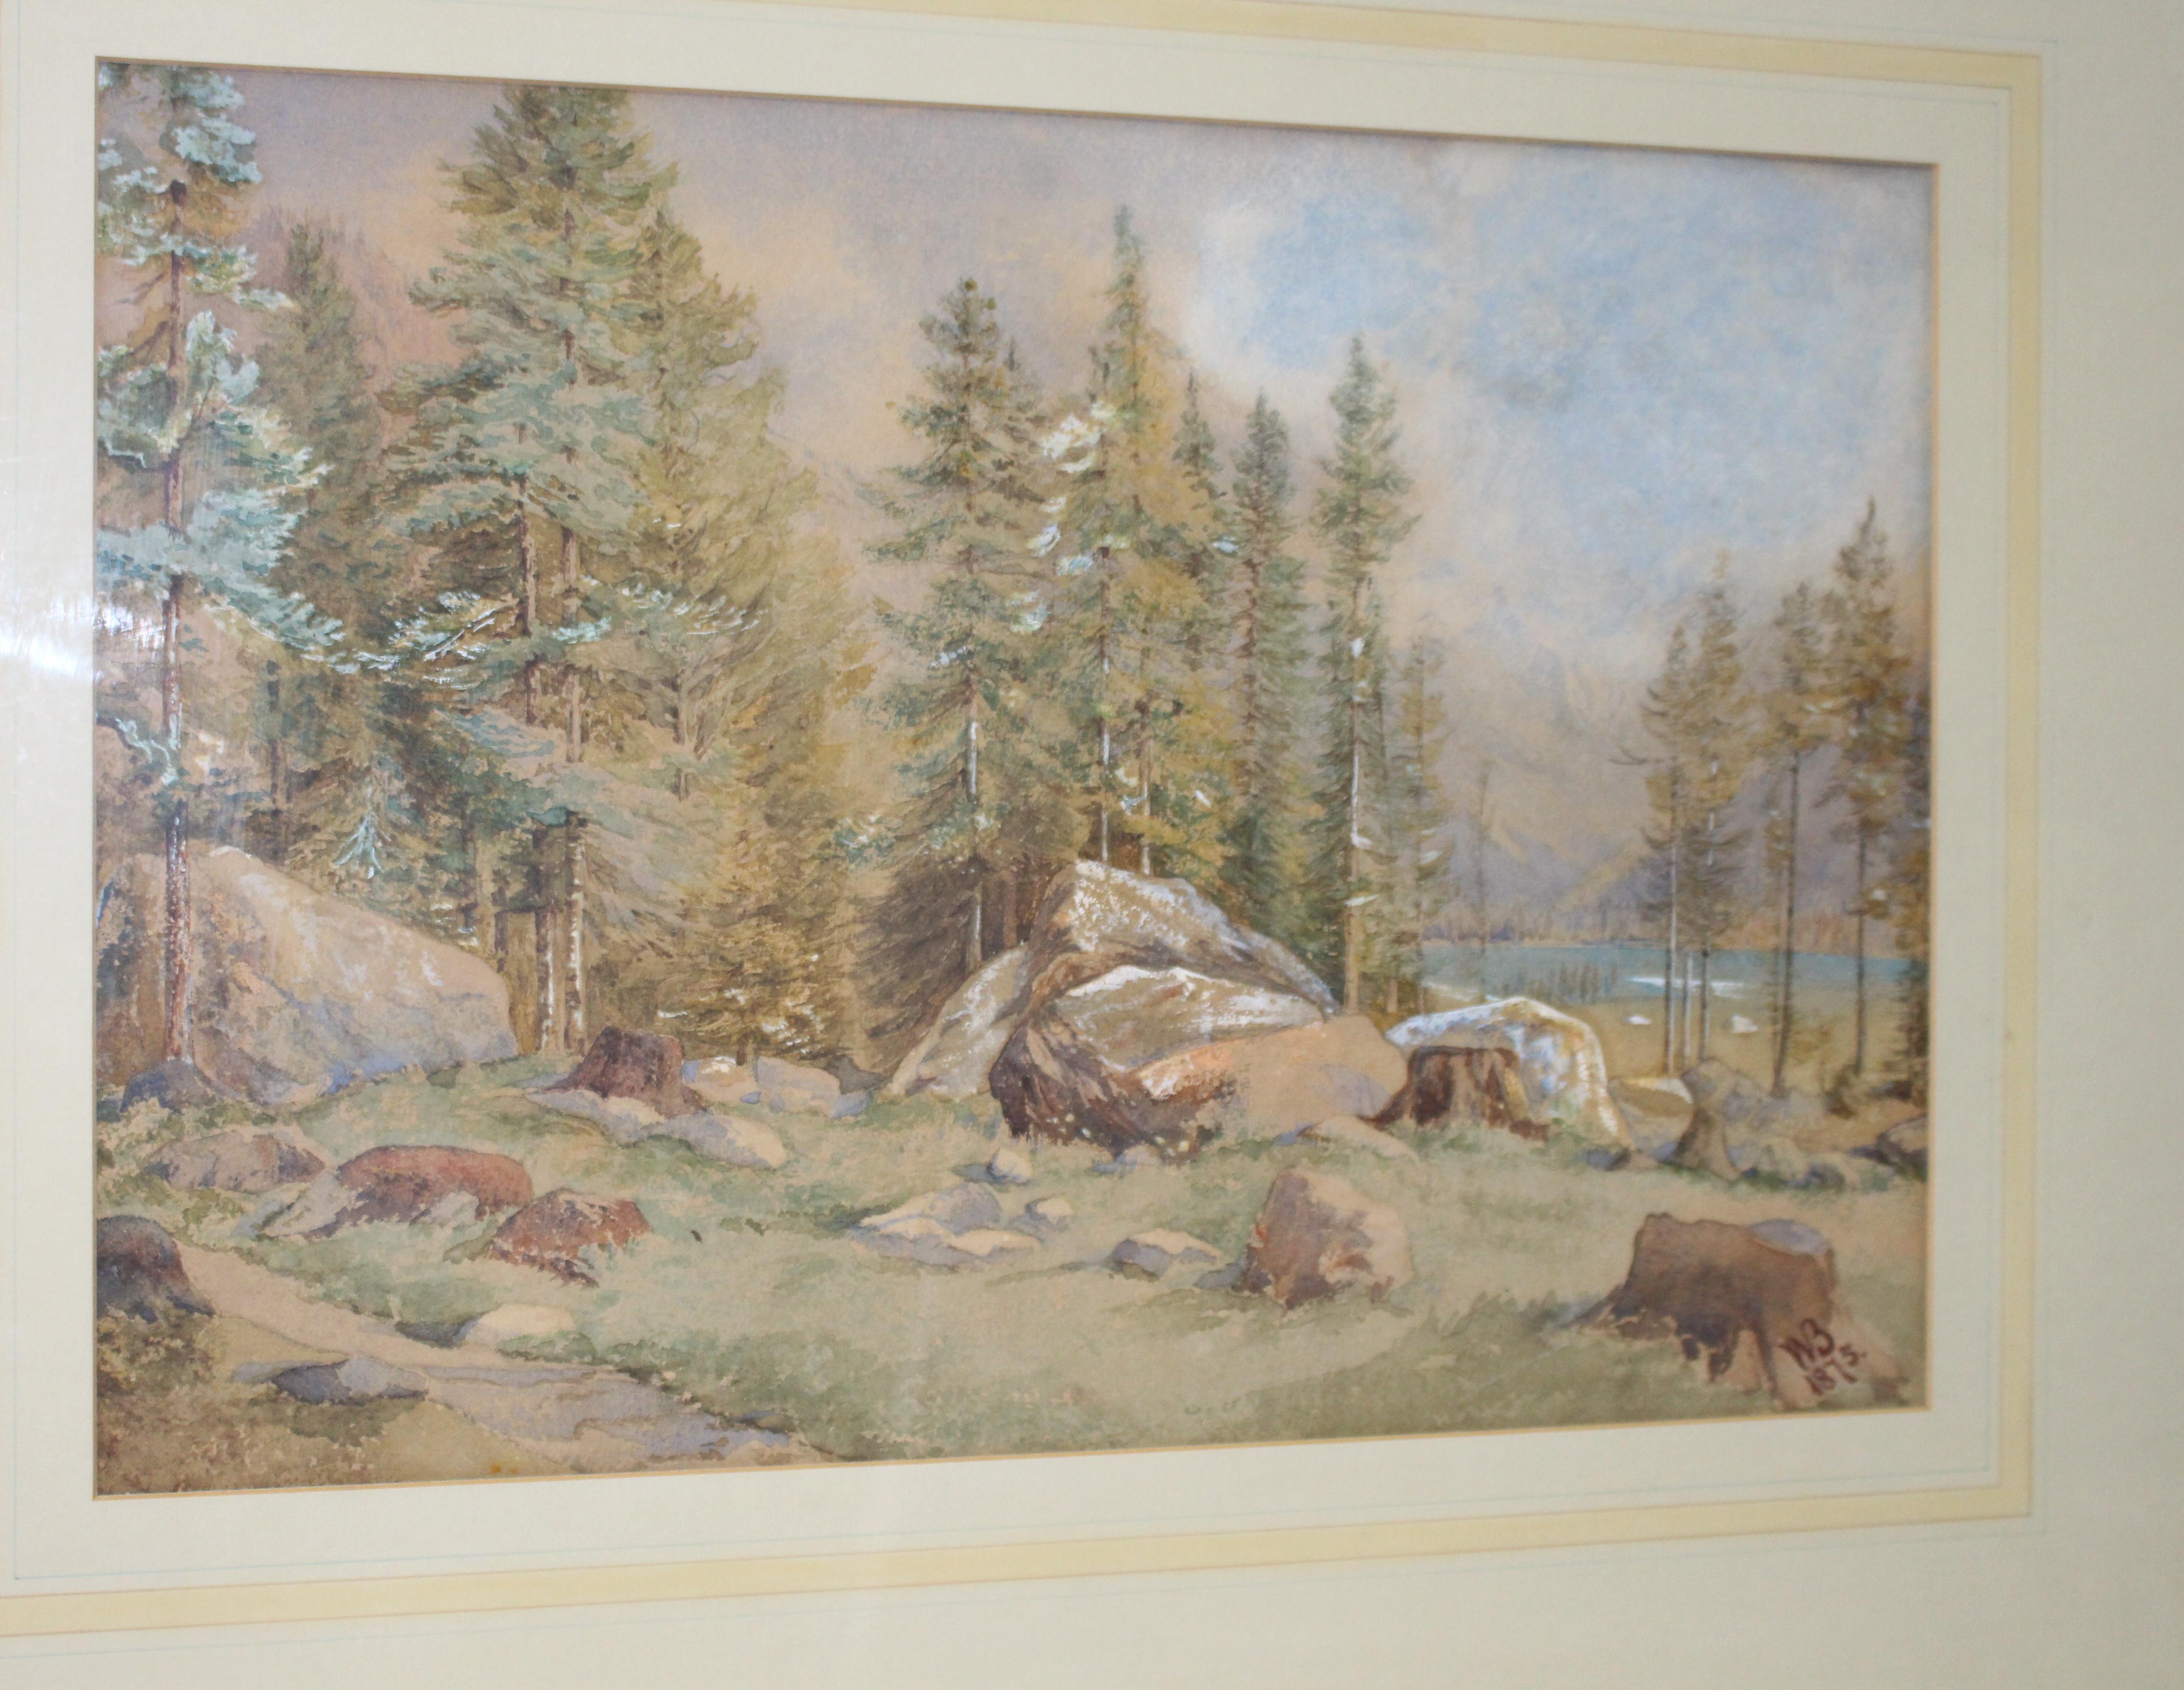 Subject 
North American landscape

Period 19th century,

Artist 
Signed and dated by the artist to the lower right

Medium 
Watercolor

Size (frame) 
81 x 64.5 cm / 32 x 25 1/2 in

Frame 
Set behind glass in wooden frame with gilt